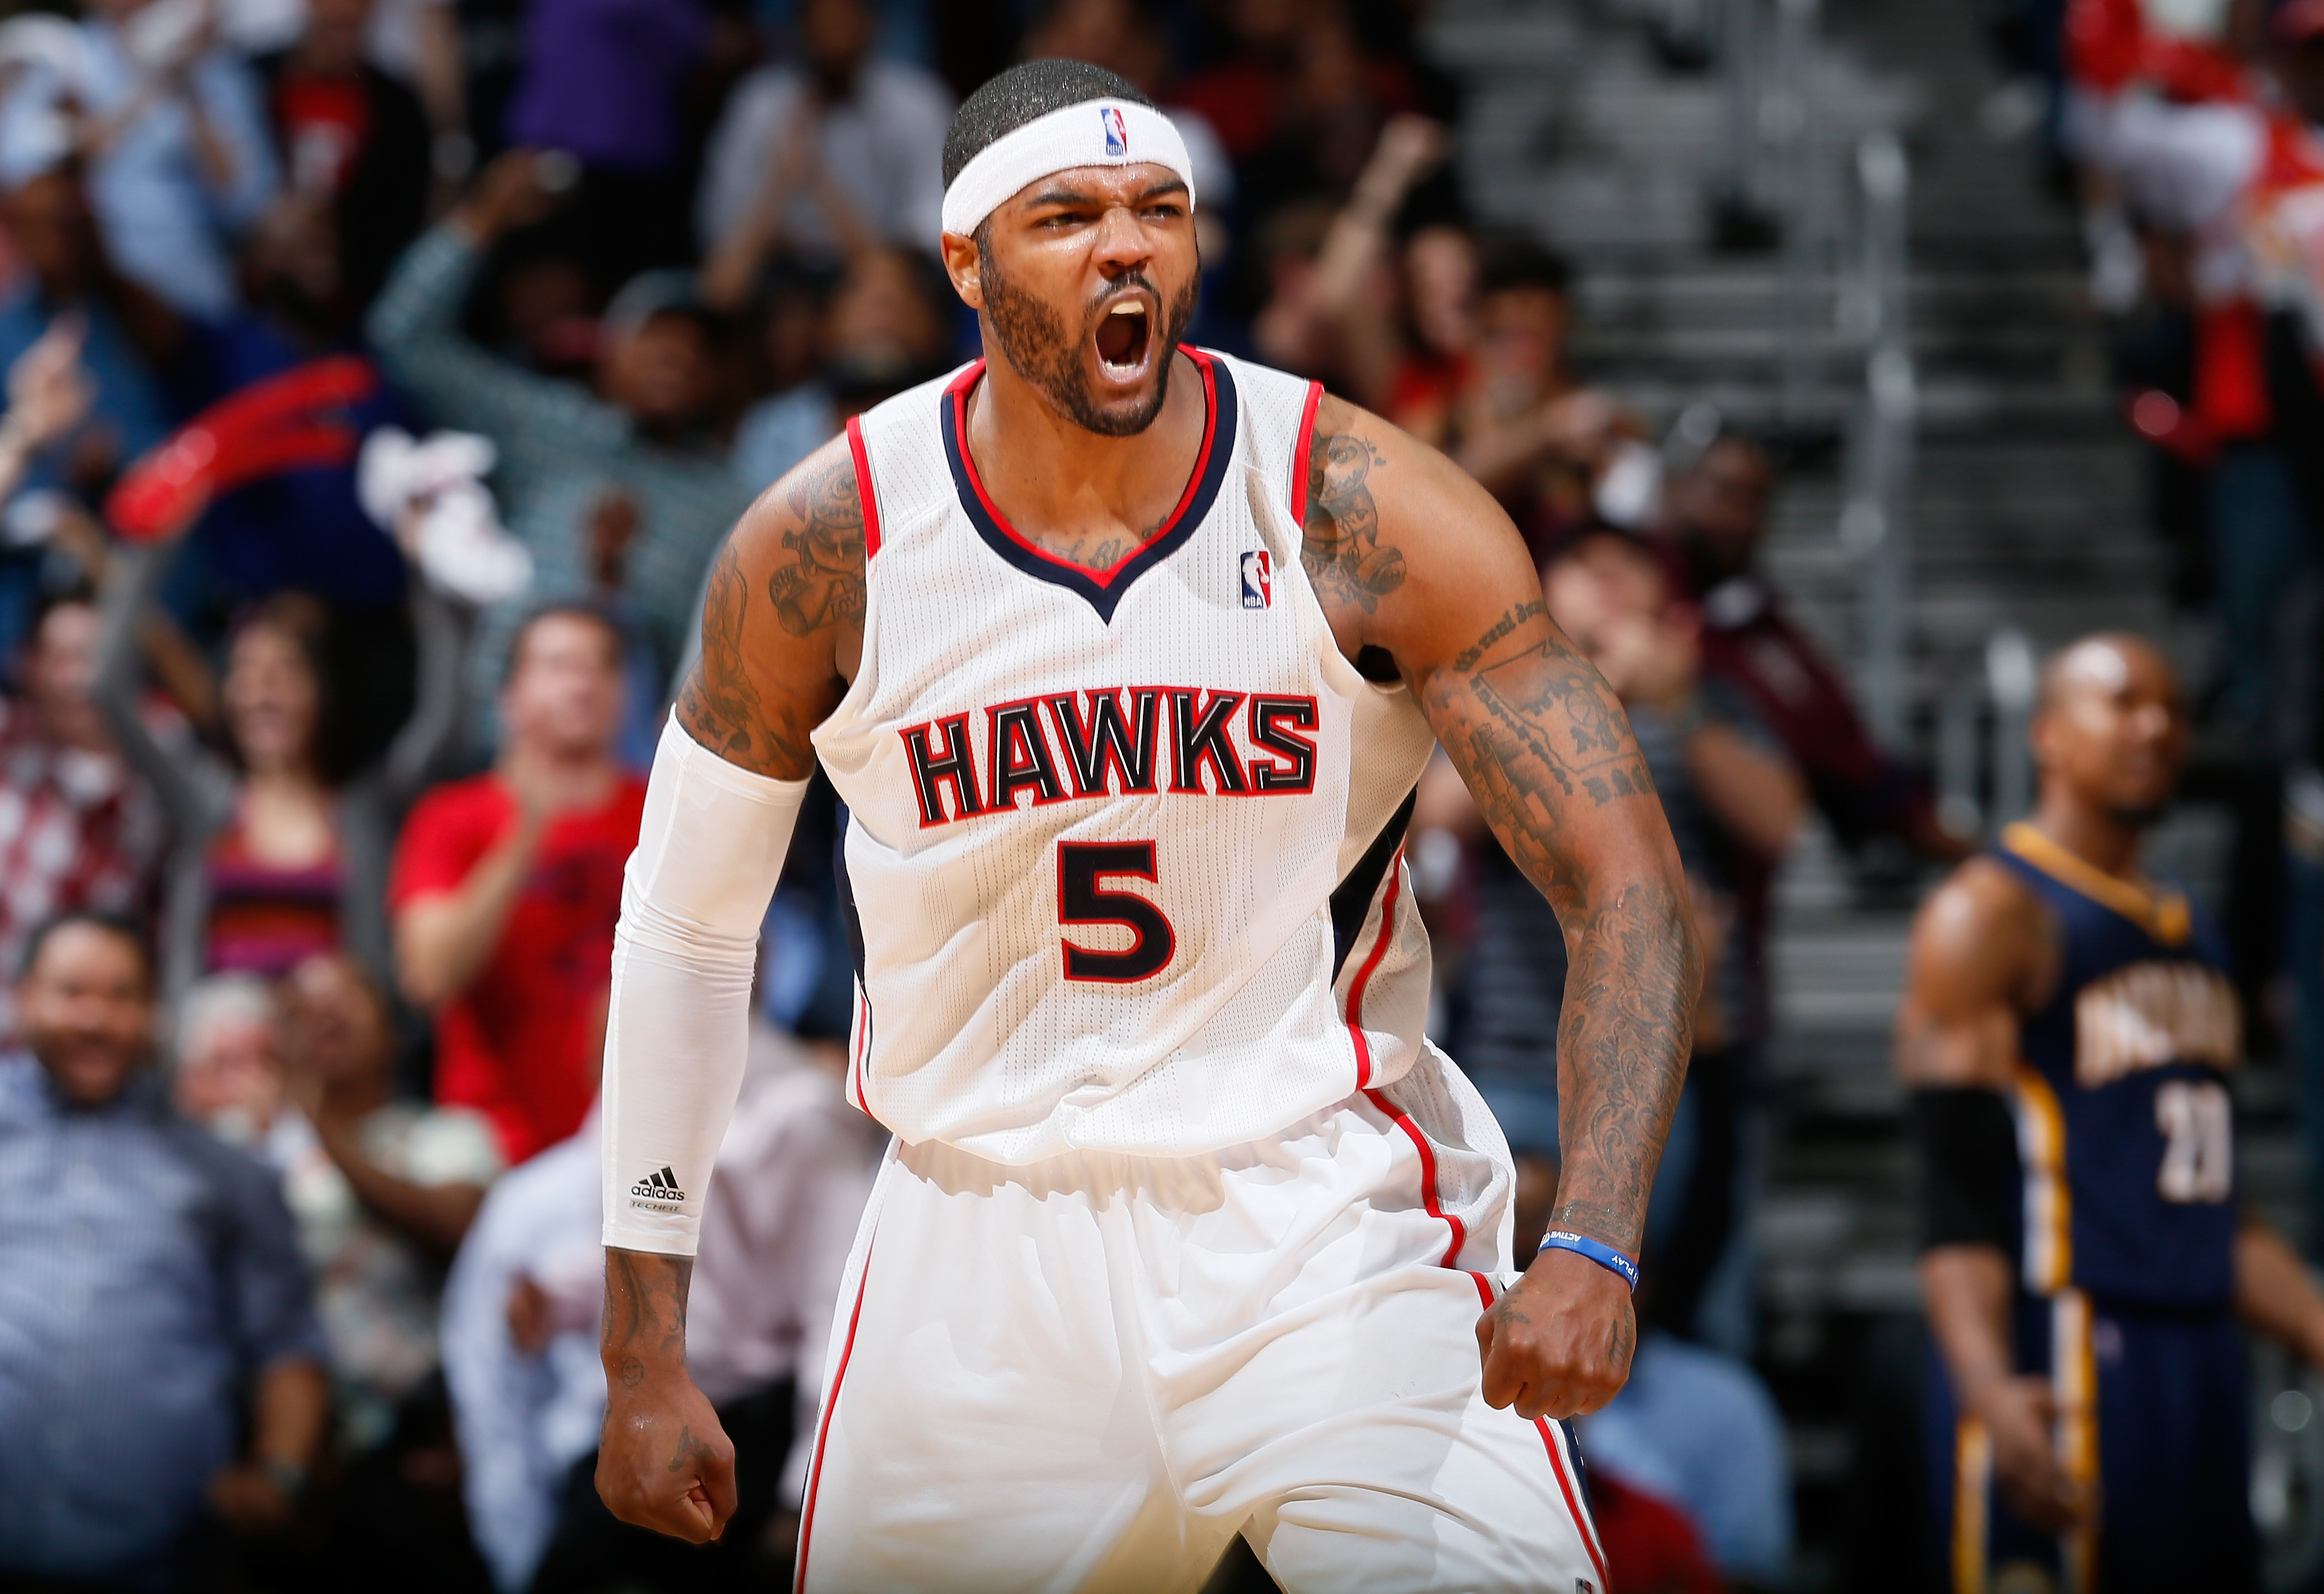 Josh Smith celebrates after making a shot during a Hawks game